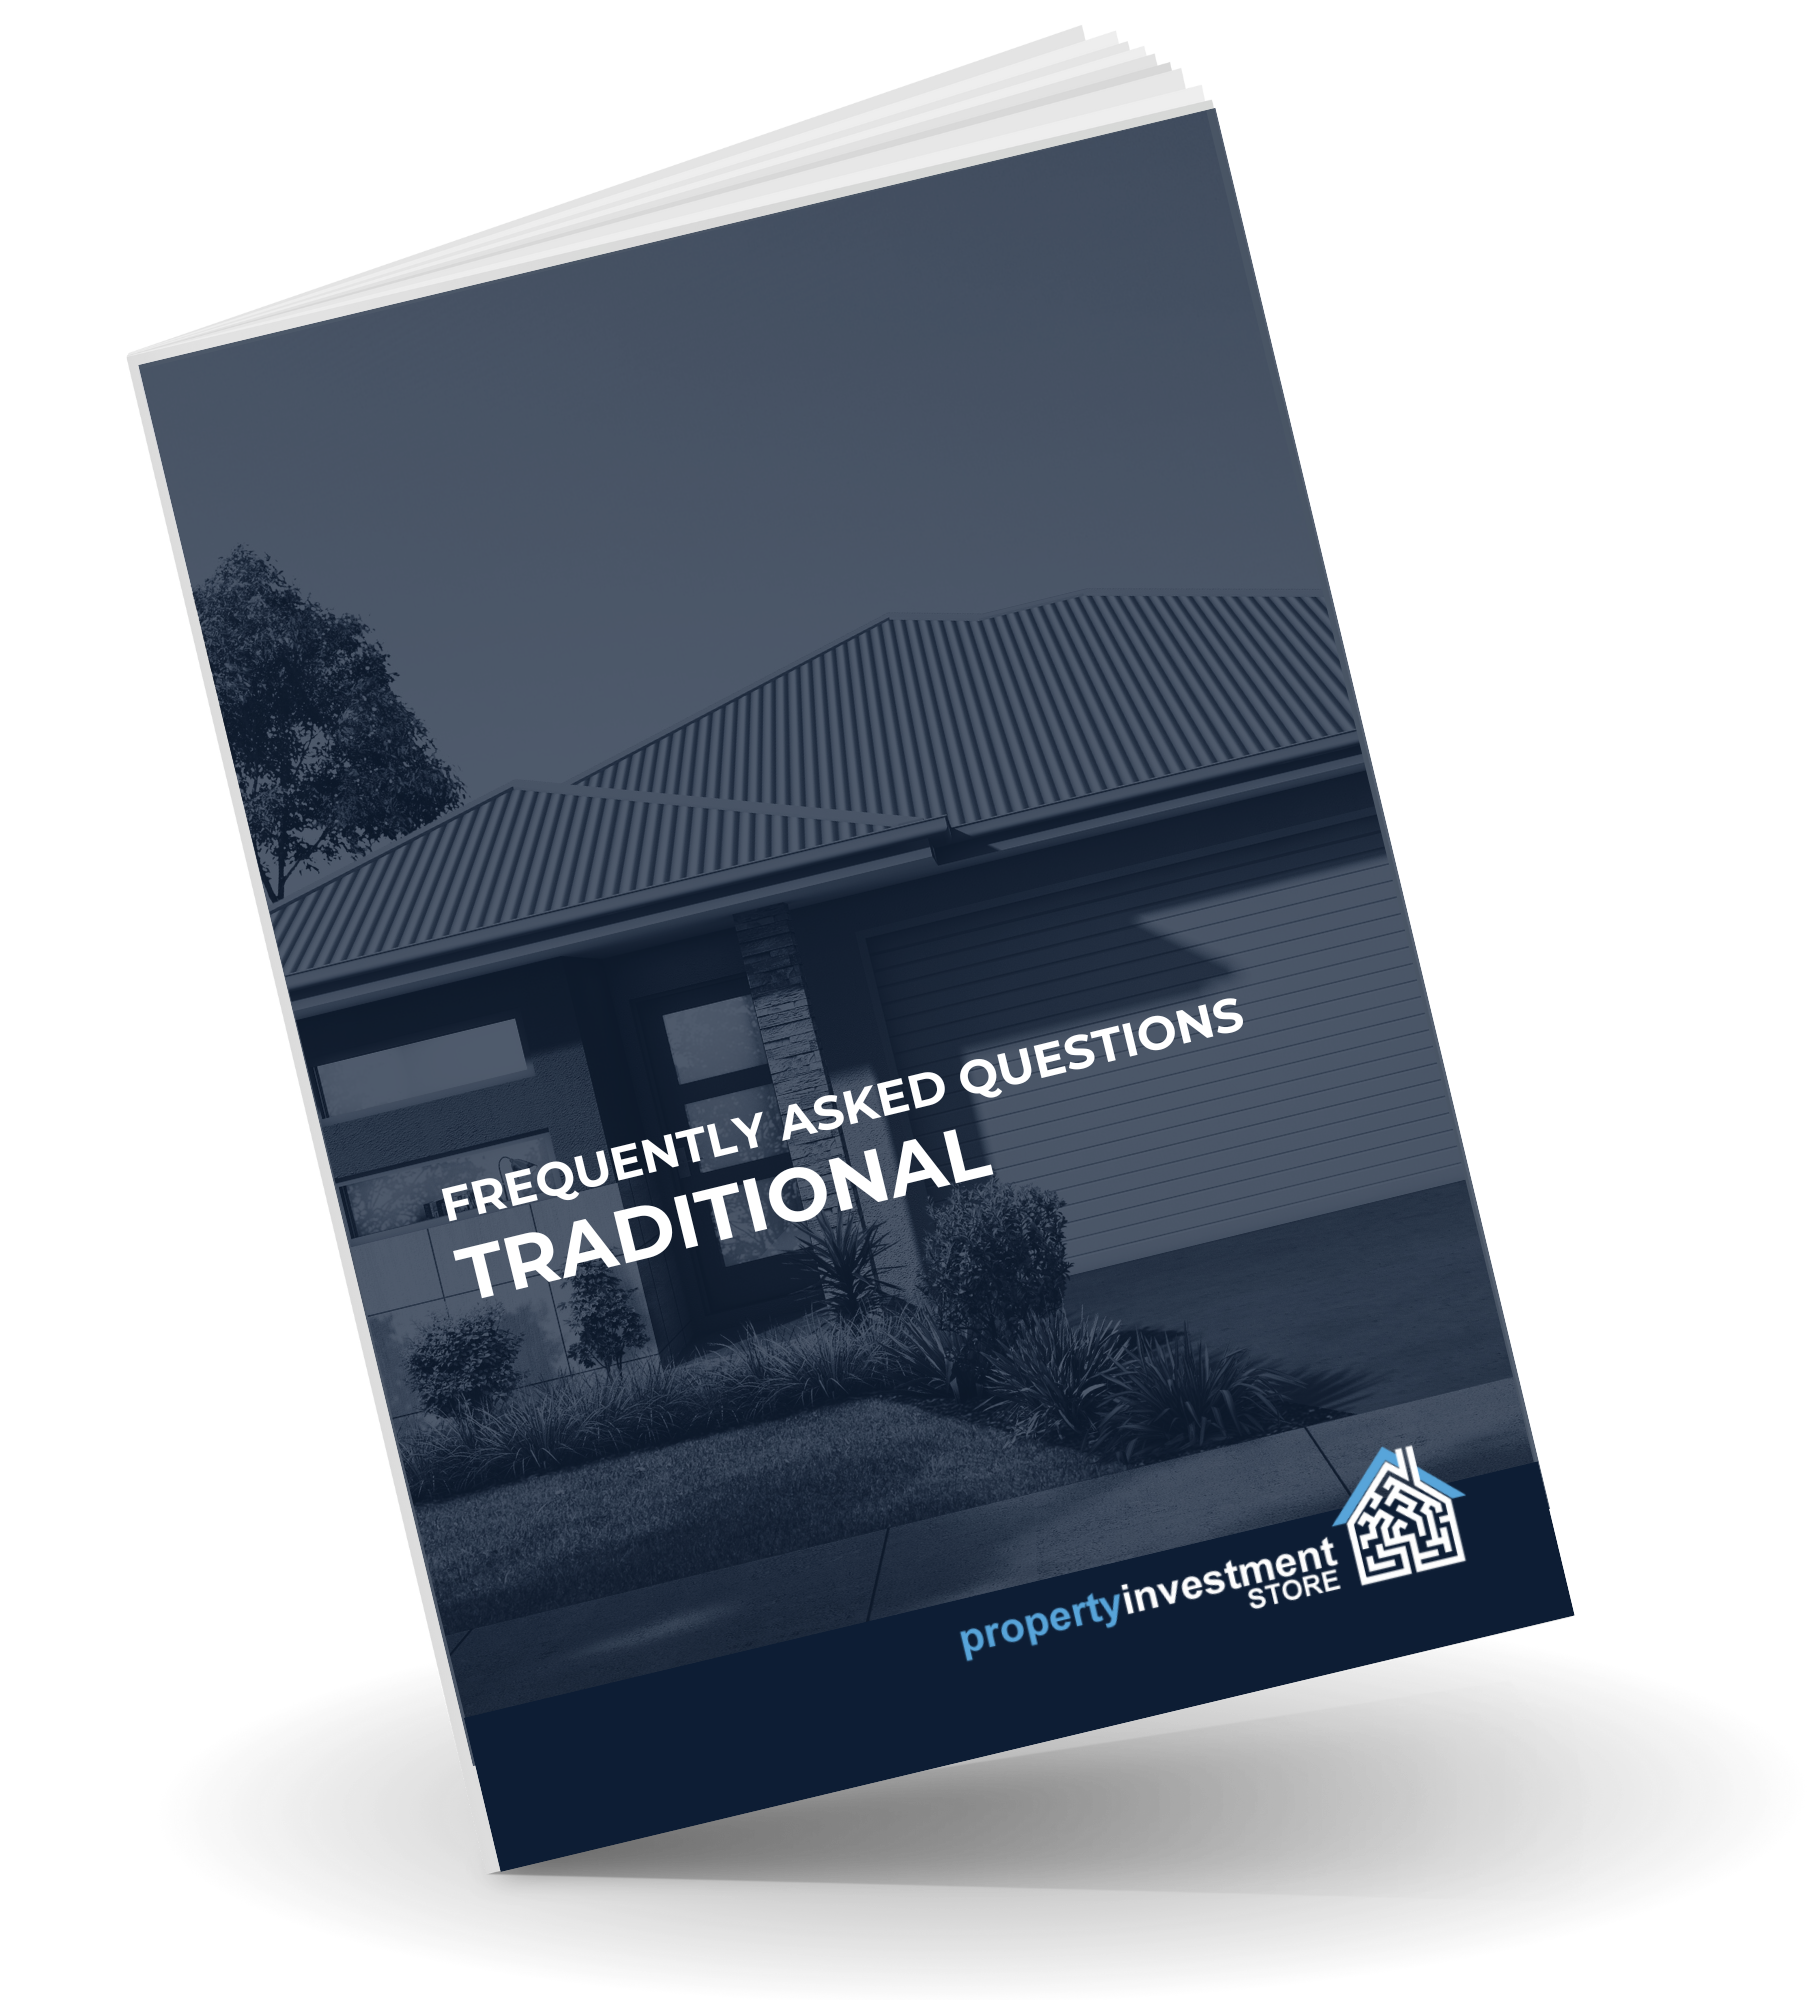 Traditional and Non-Traditional Investment Properties